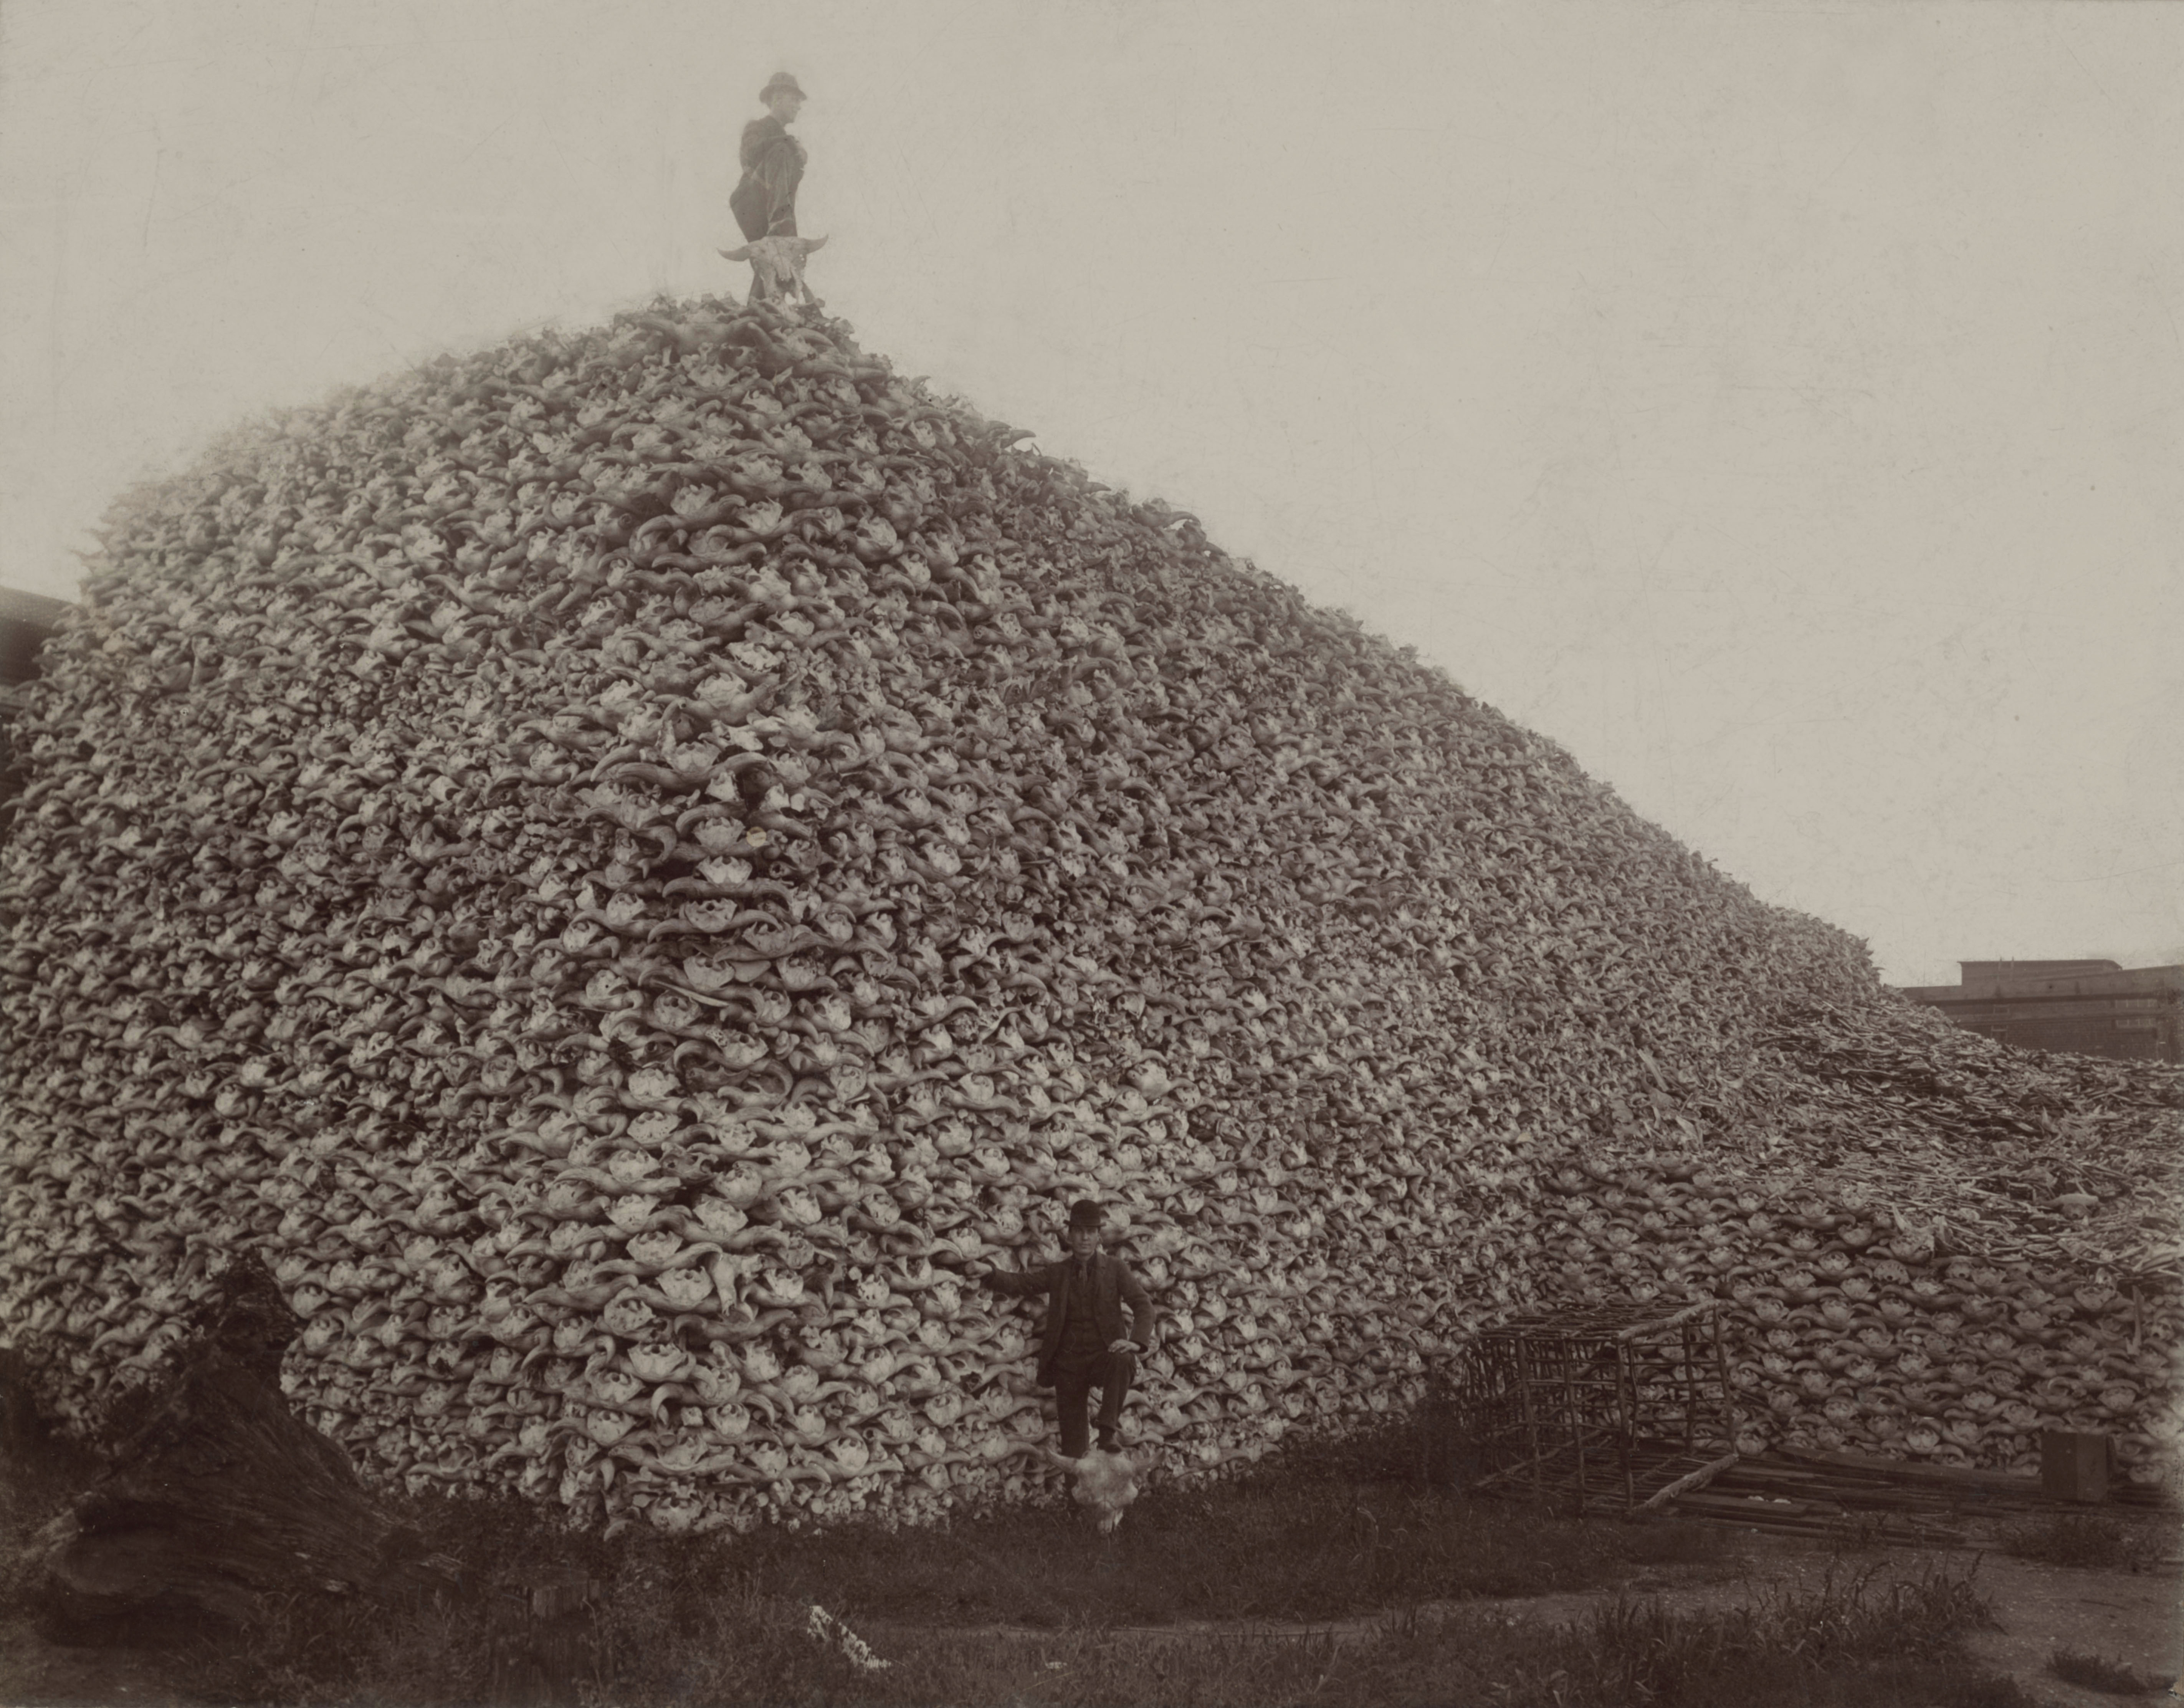 Bison skulls, in Detroit, MI, waiting to be ground up for fertilizer in 1892. Photo courtesy of Wikimedia Commons